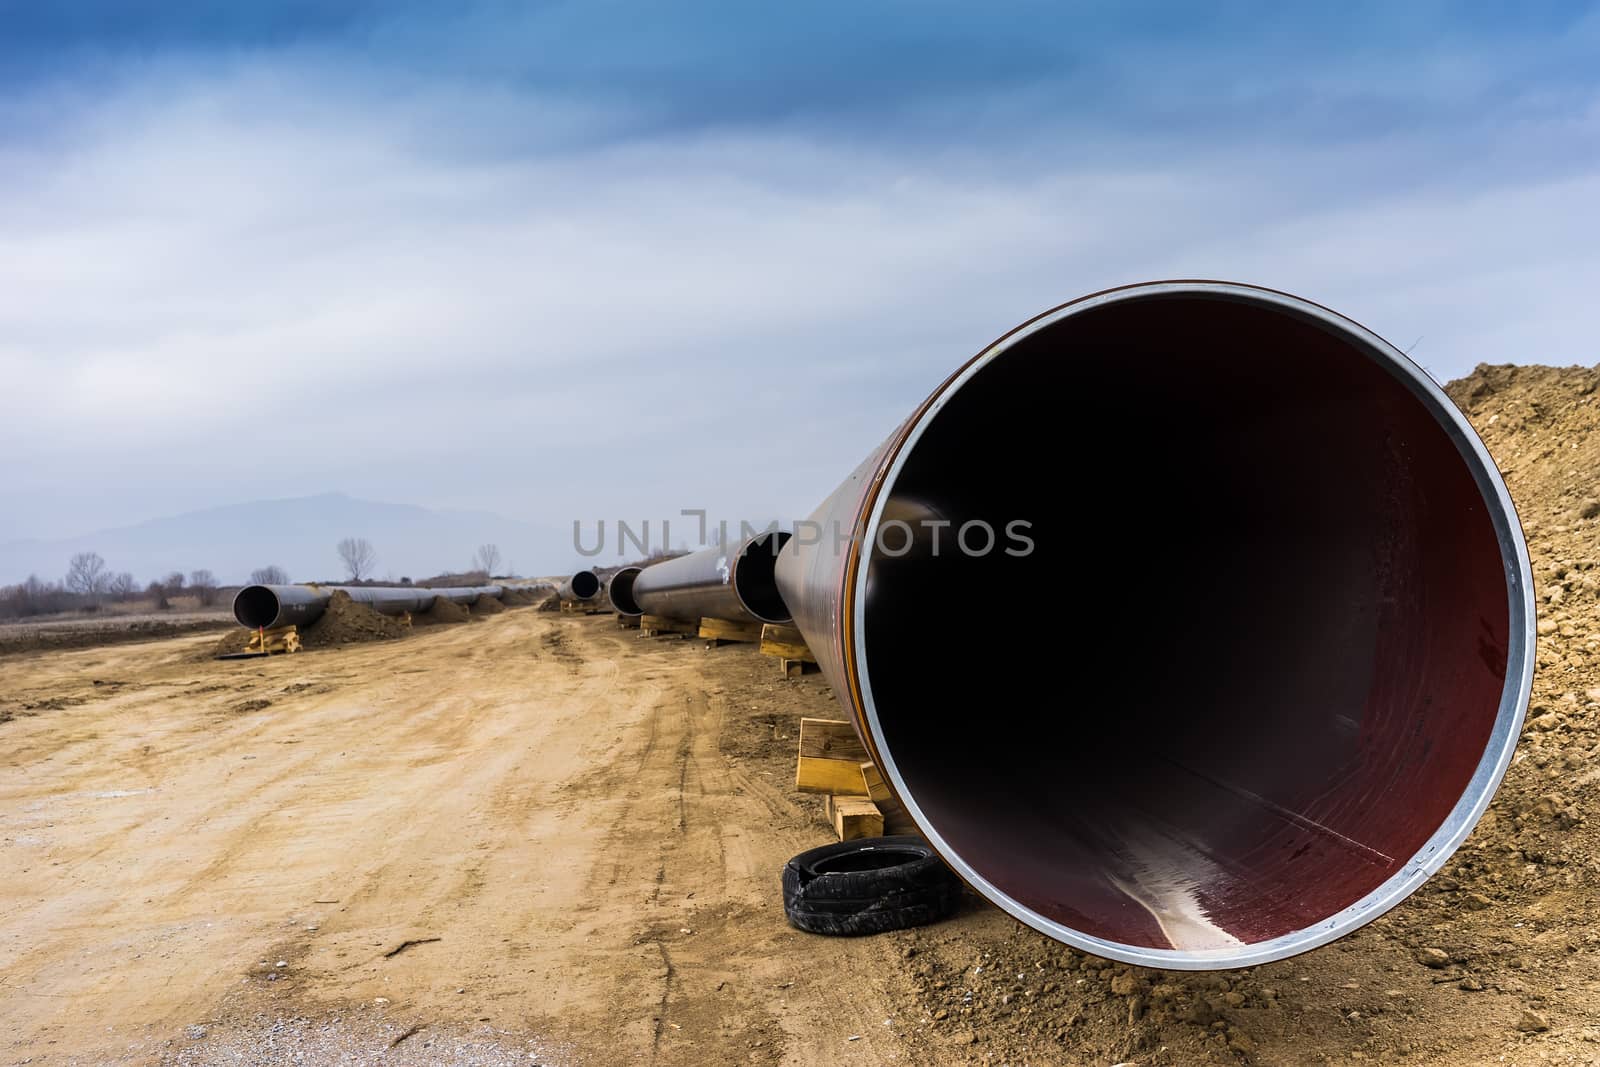 construction of gas pipeline Trans Adriatic Pipeline - TAP in north Greece. The pipeline starts from the Caspian sea and reaches the coast of southern Italy